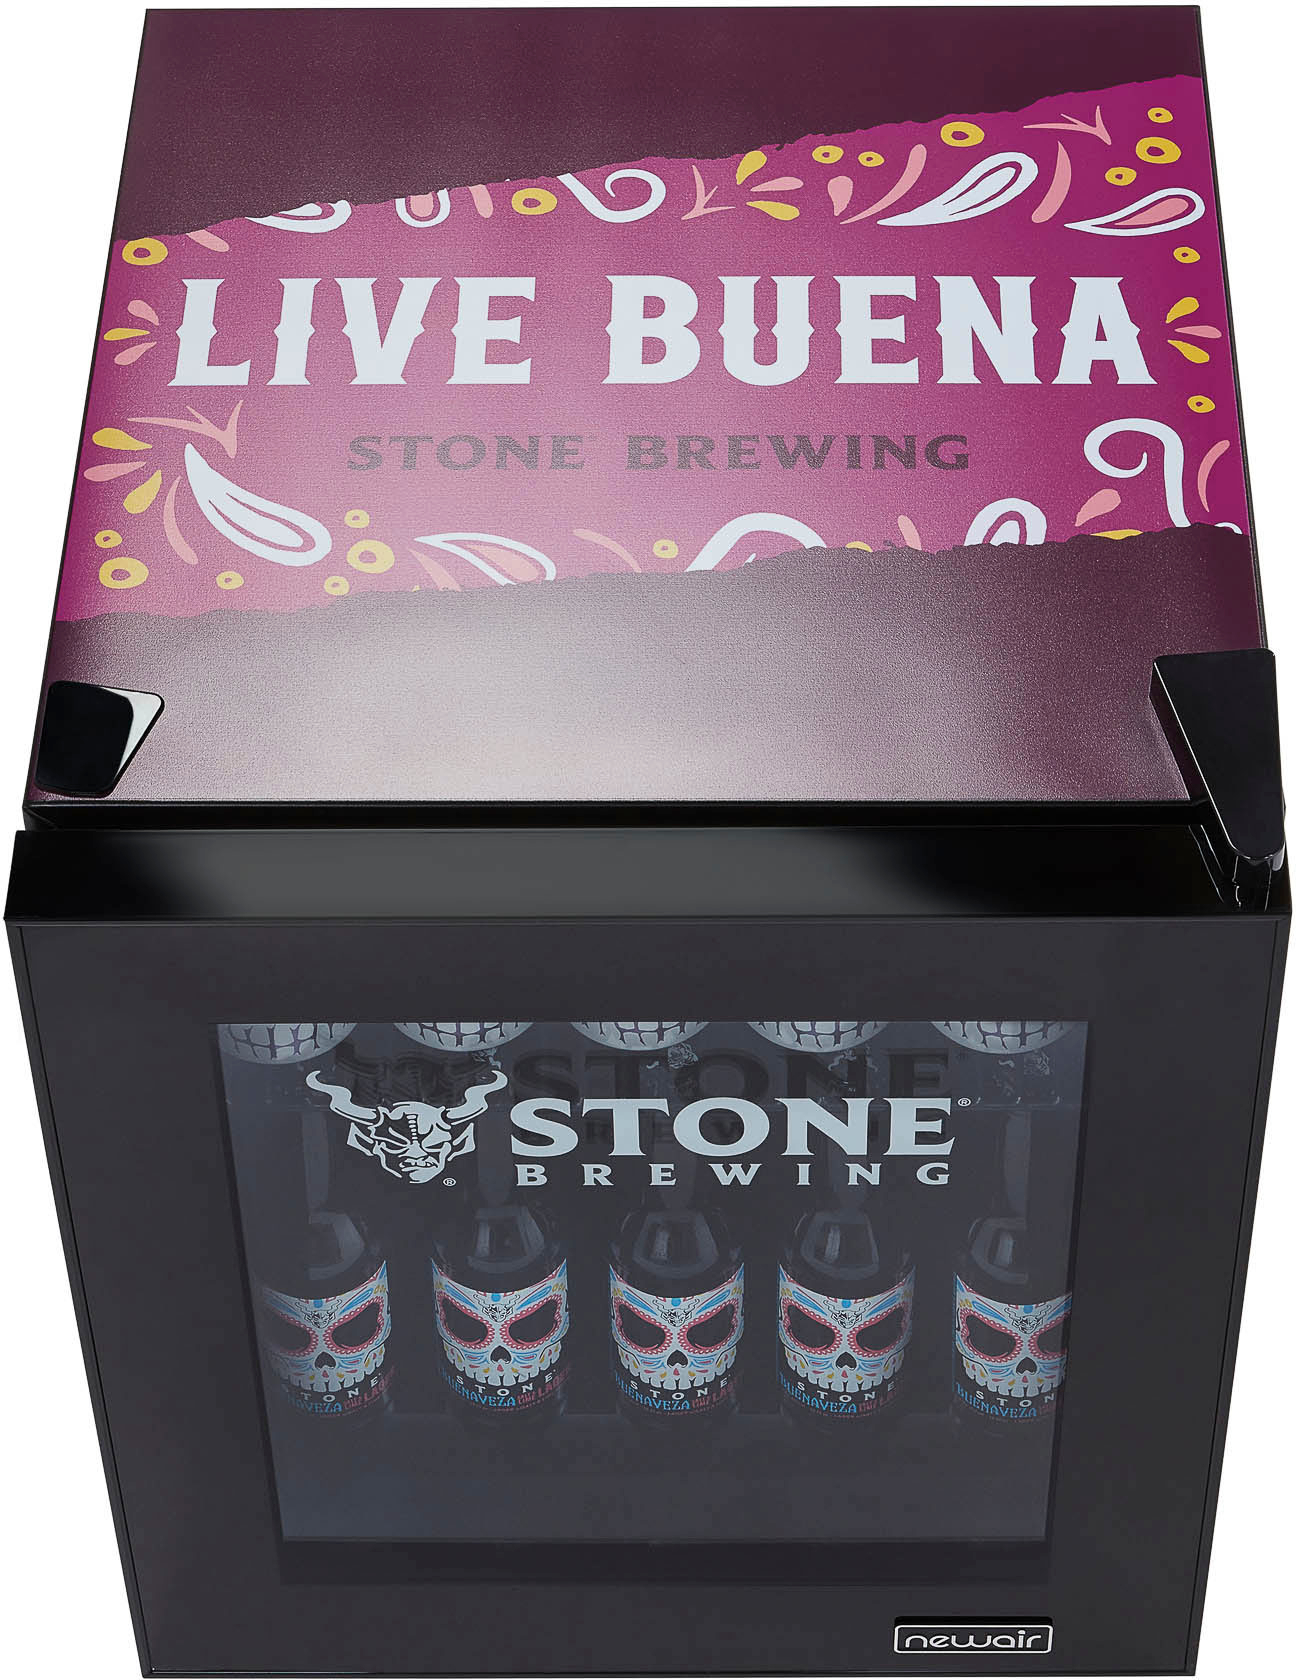 Angle View: NewAir - Stone Brewing Live Buena Beverage Cooler, 60 Can with Glass Door and Removable Shelf - Purple